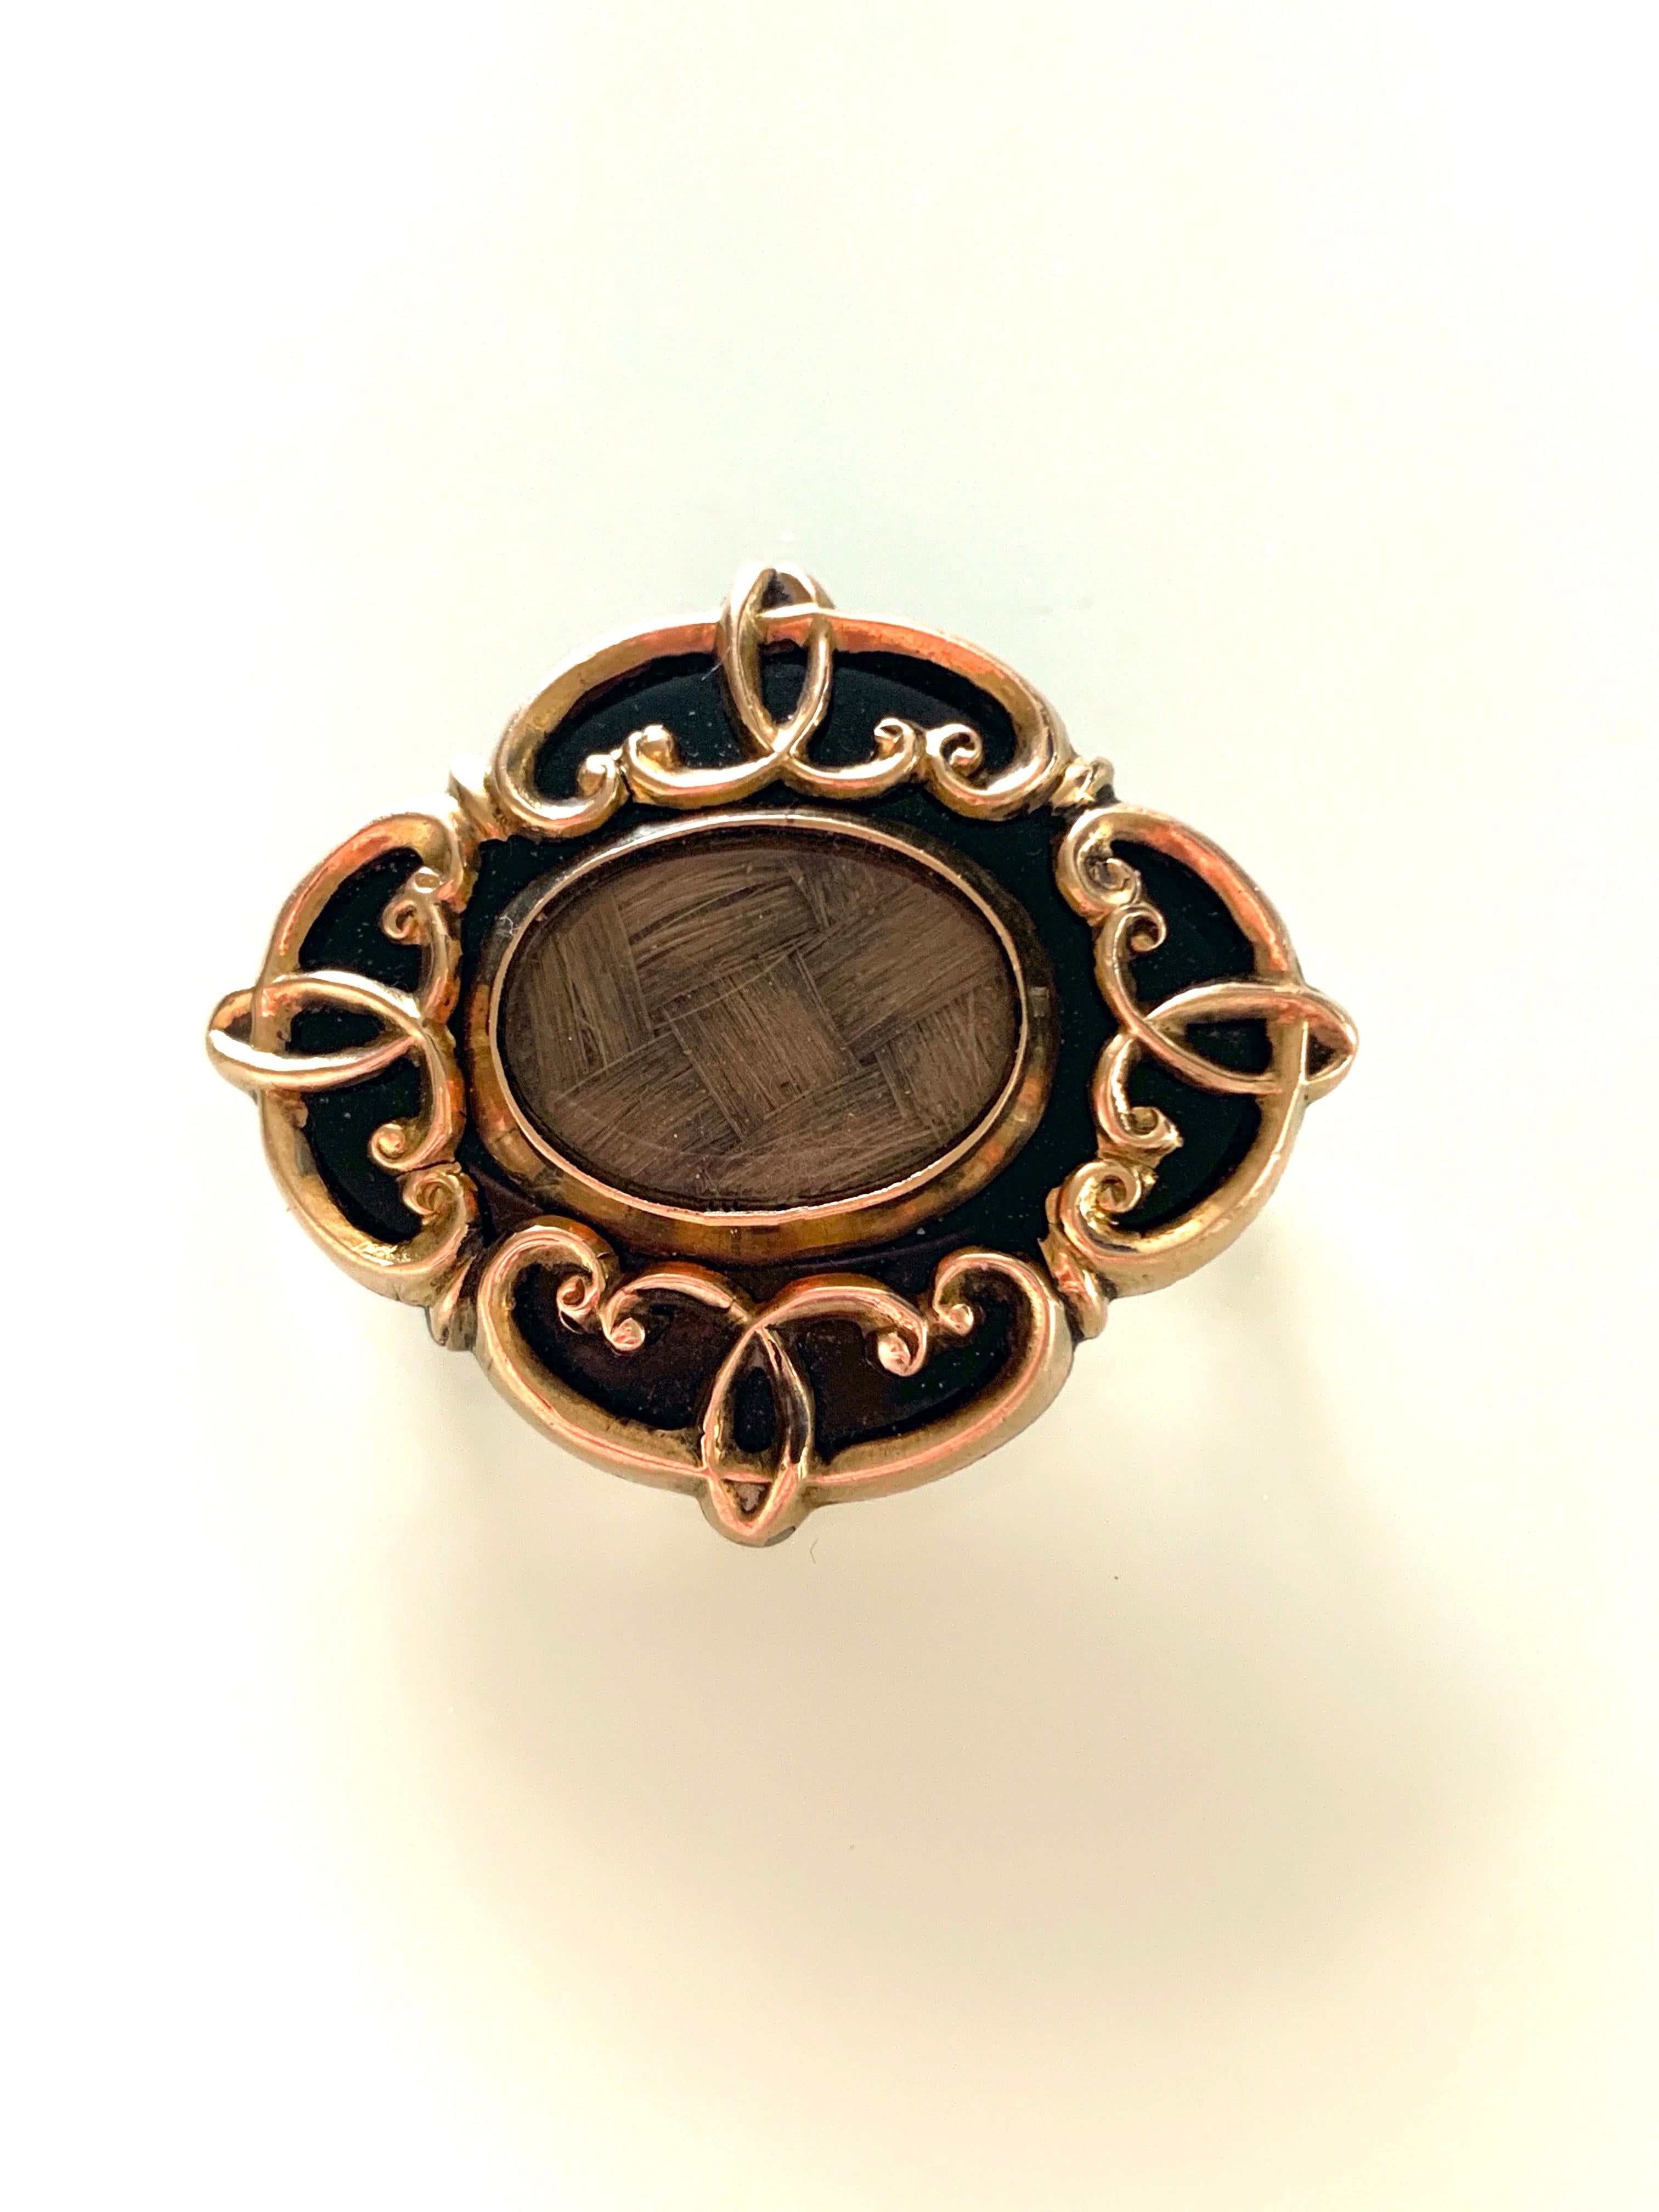 Antique Victorian Memorial Brooch/Pendant
with encase woven hair sample of the deceased
made from 10ct Gold & onyx
unmarked for 10ct gold
has been texted with XRF in Hatton Garden,London
Weight 10.69 grams
size 3.5cm x 3.2cm x 3mm